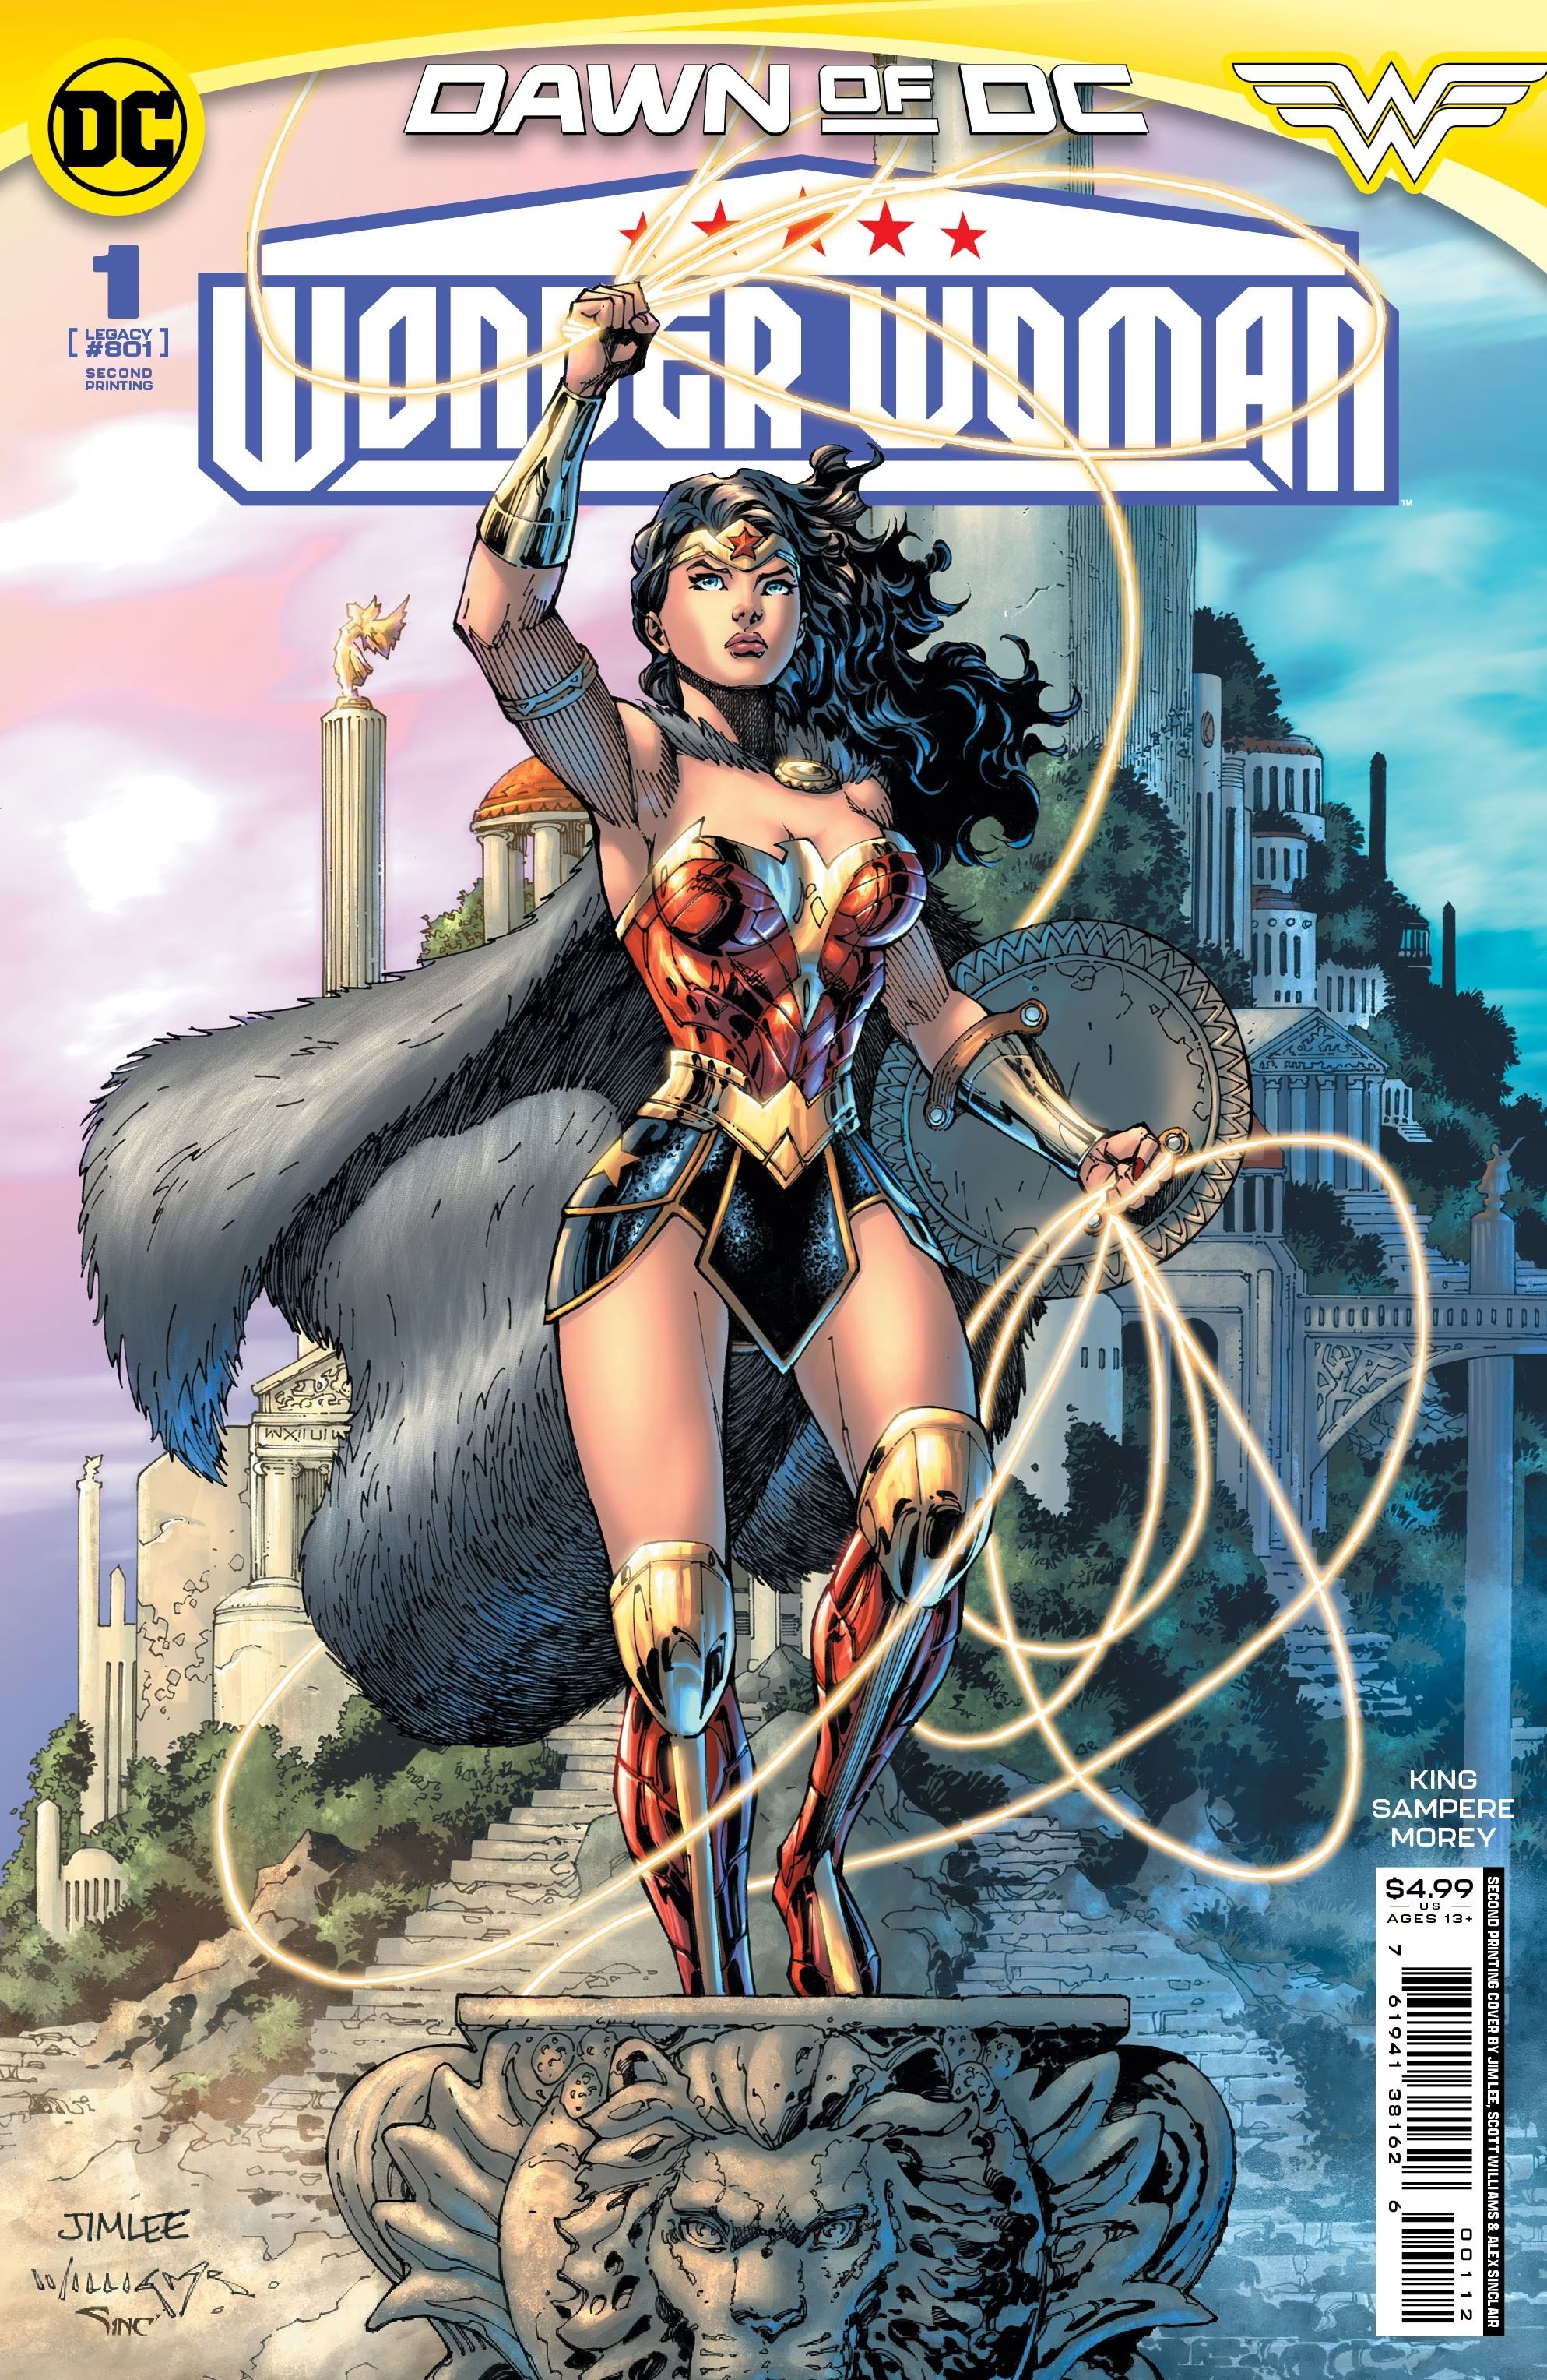 After Batman & Superman, Jim Lee’s Wonder Woman Cover Finally Completes His DC Trinity